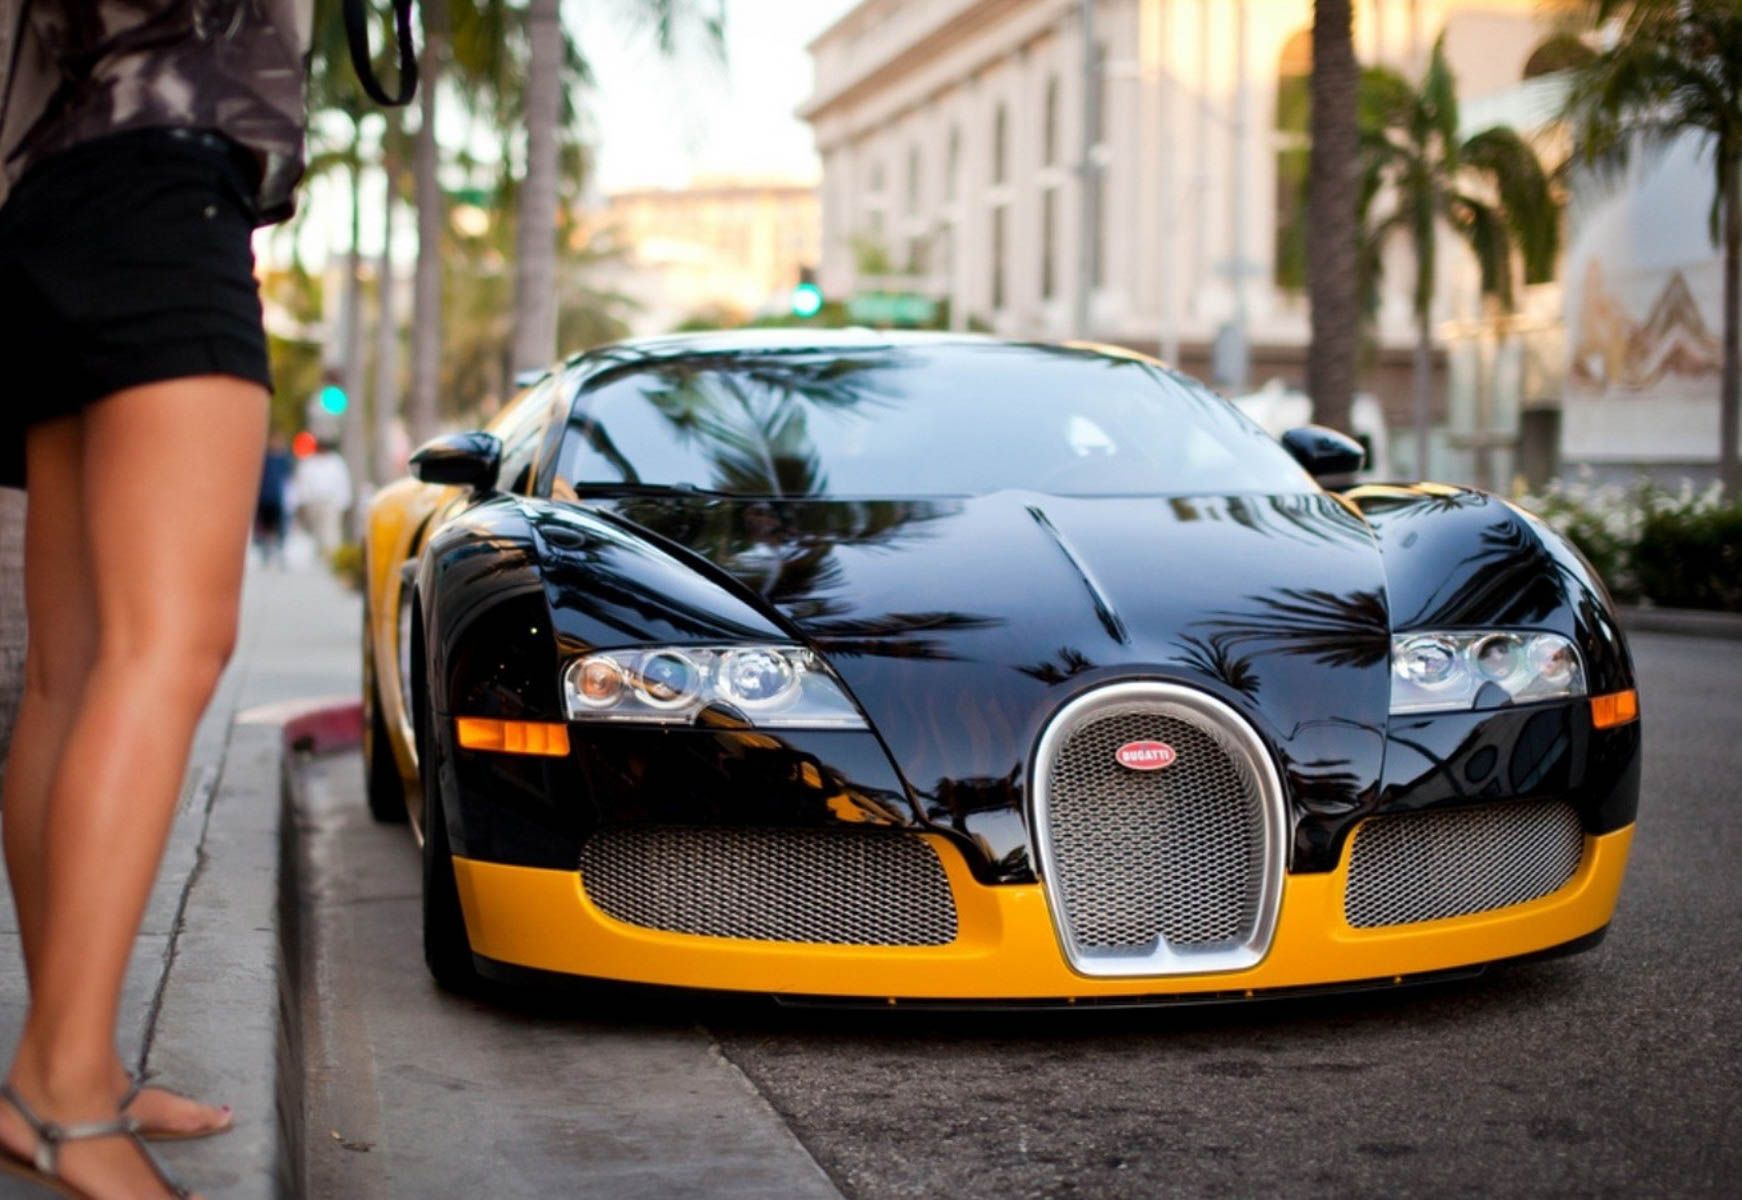 Bugatti Veyron Wallpapers & Pictures In High Quality.